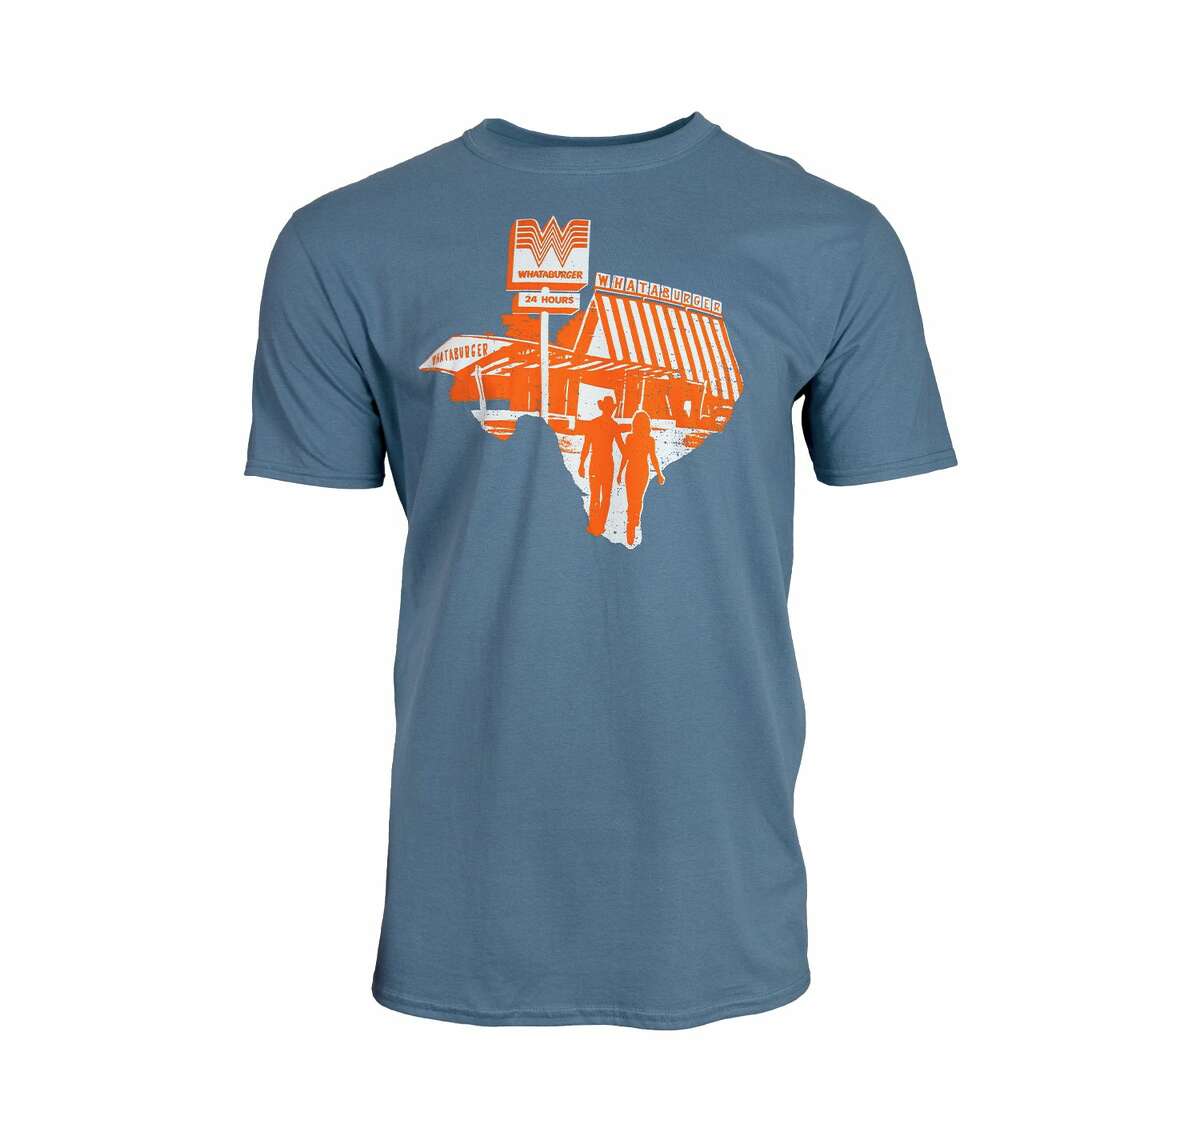 Whataburger’s Texas-themed apparel made in collaboration the New Braunfels-based Staunch Traditional Outfitters.